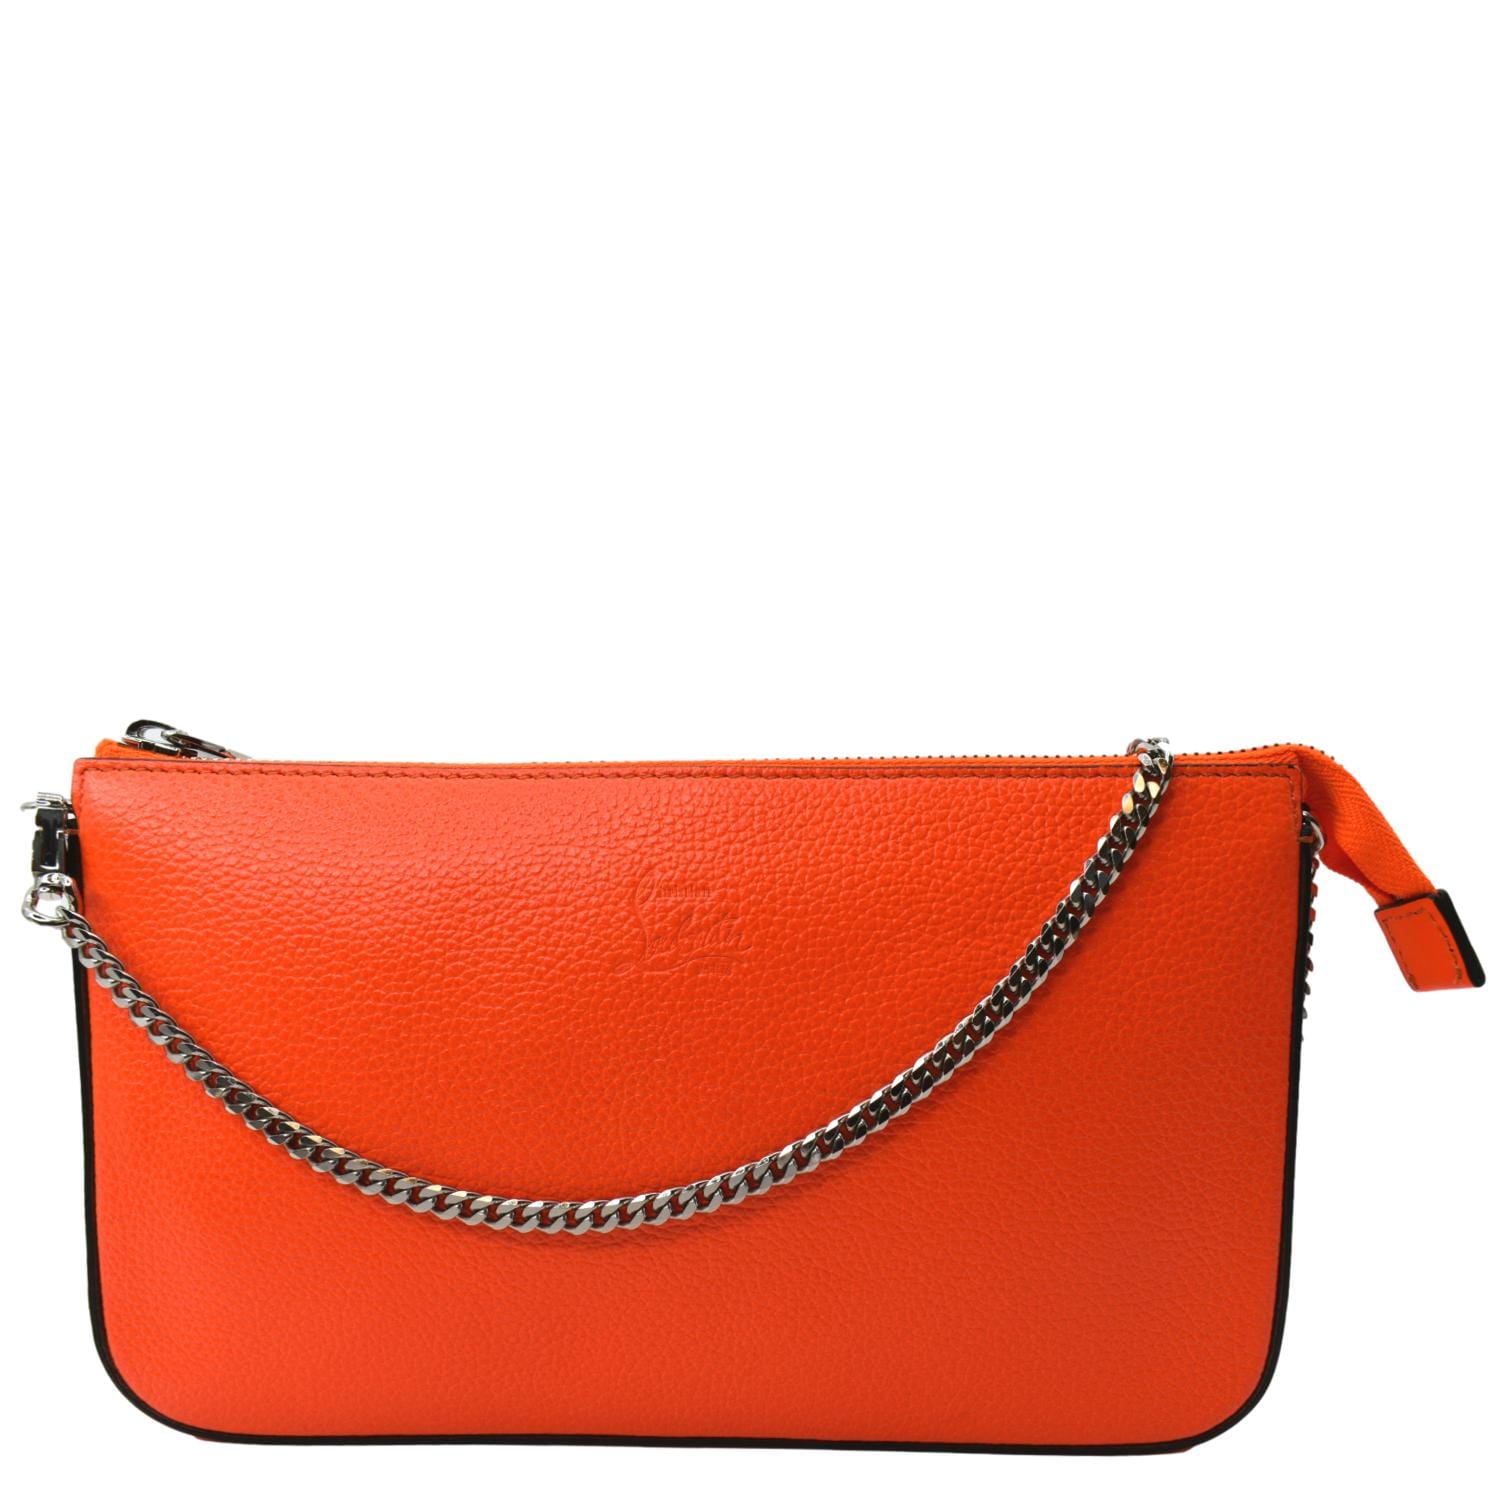 Christian Louboutin - Authenticated Handbag - Leather Orange for Women, Never Worn, with Tag